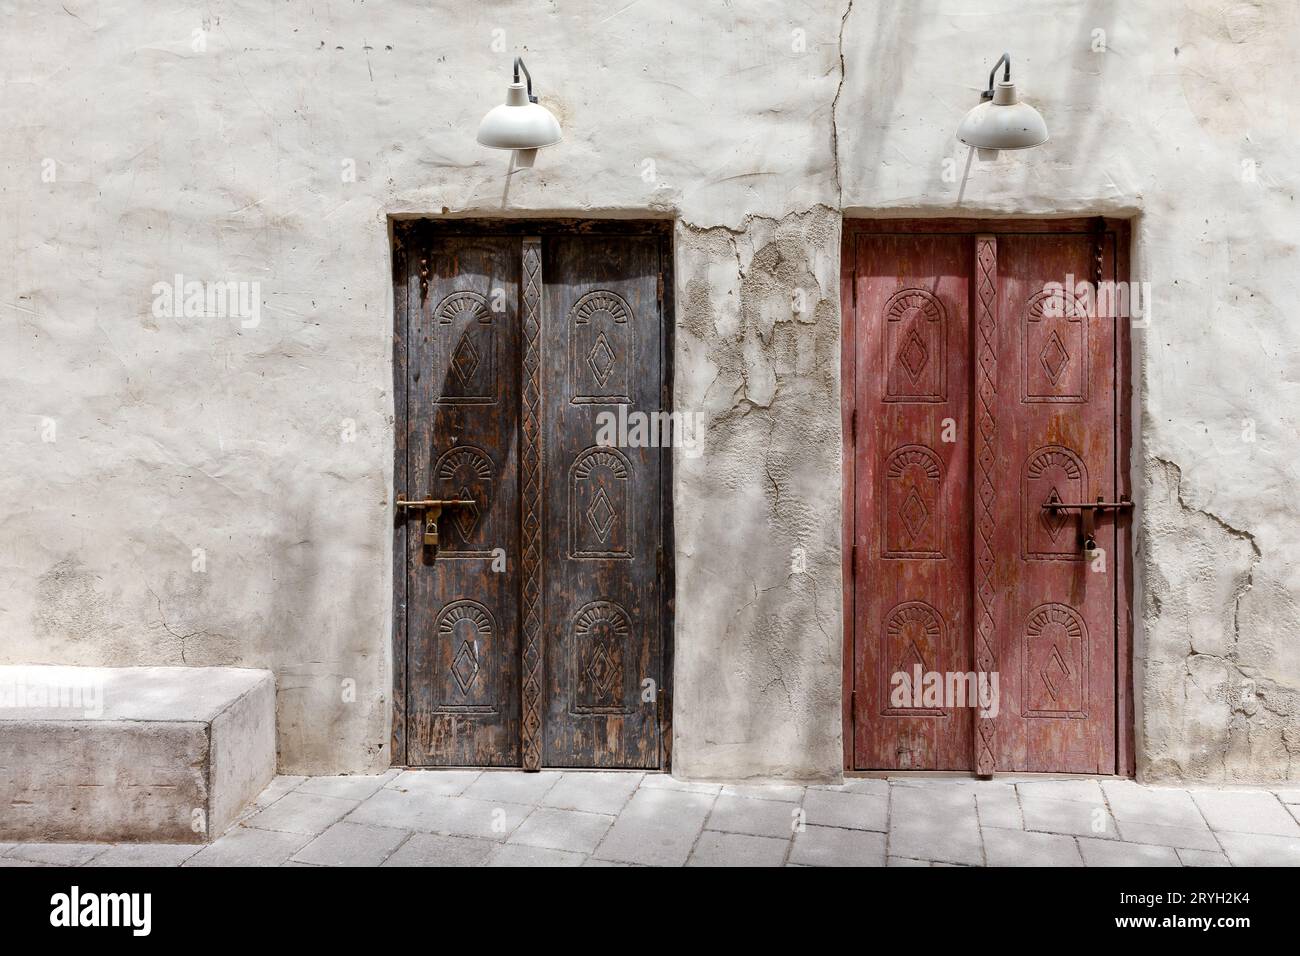 Arabic style doors at the traditional market in old Dubai Stock Photo